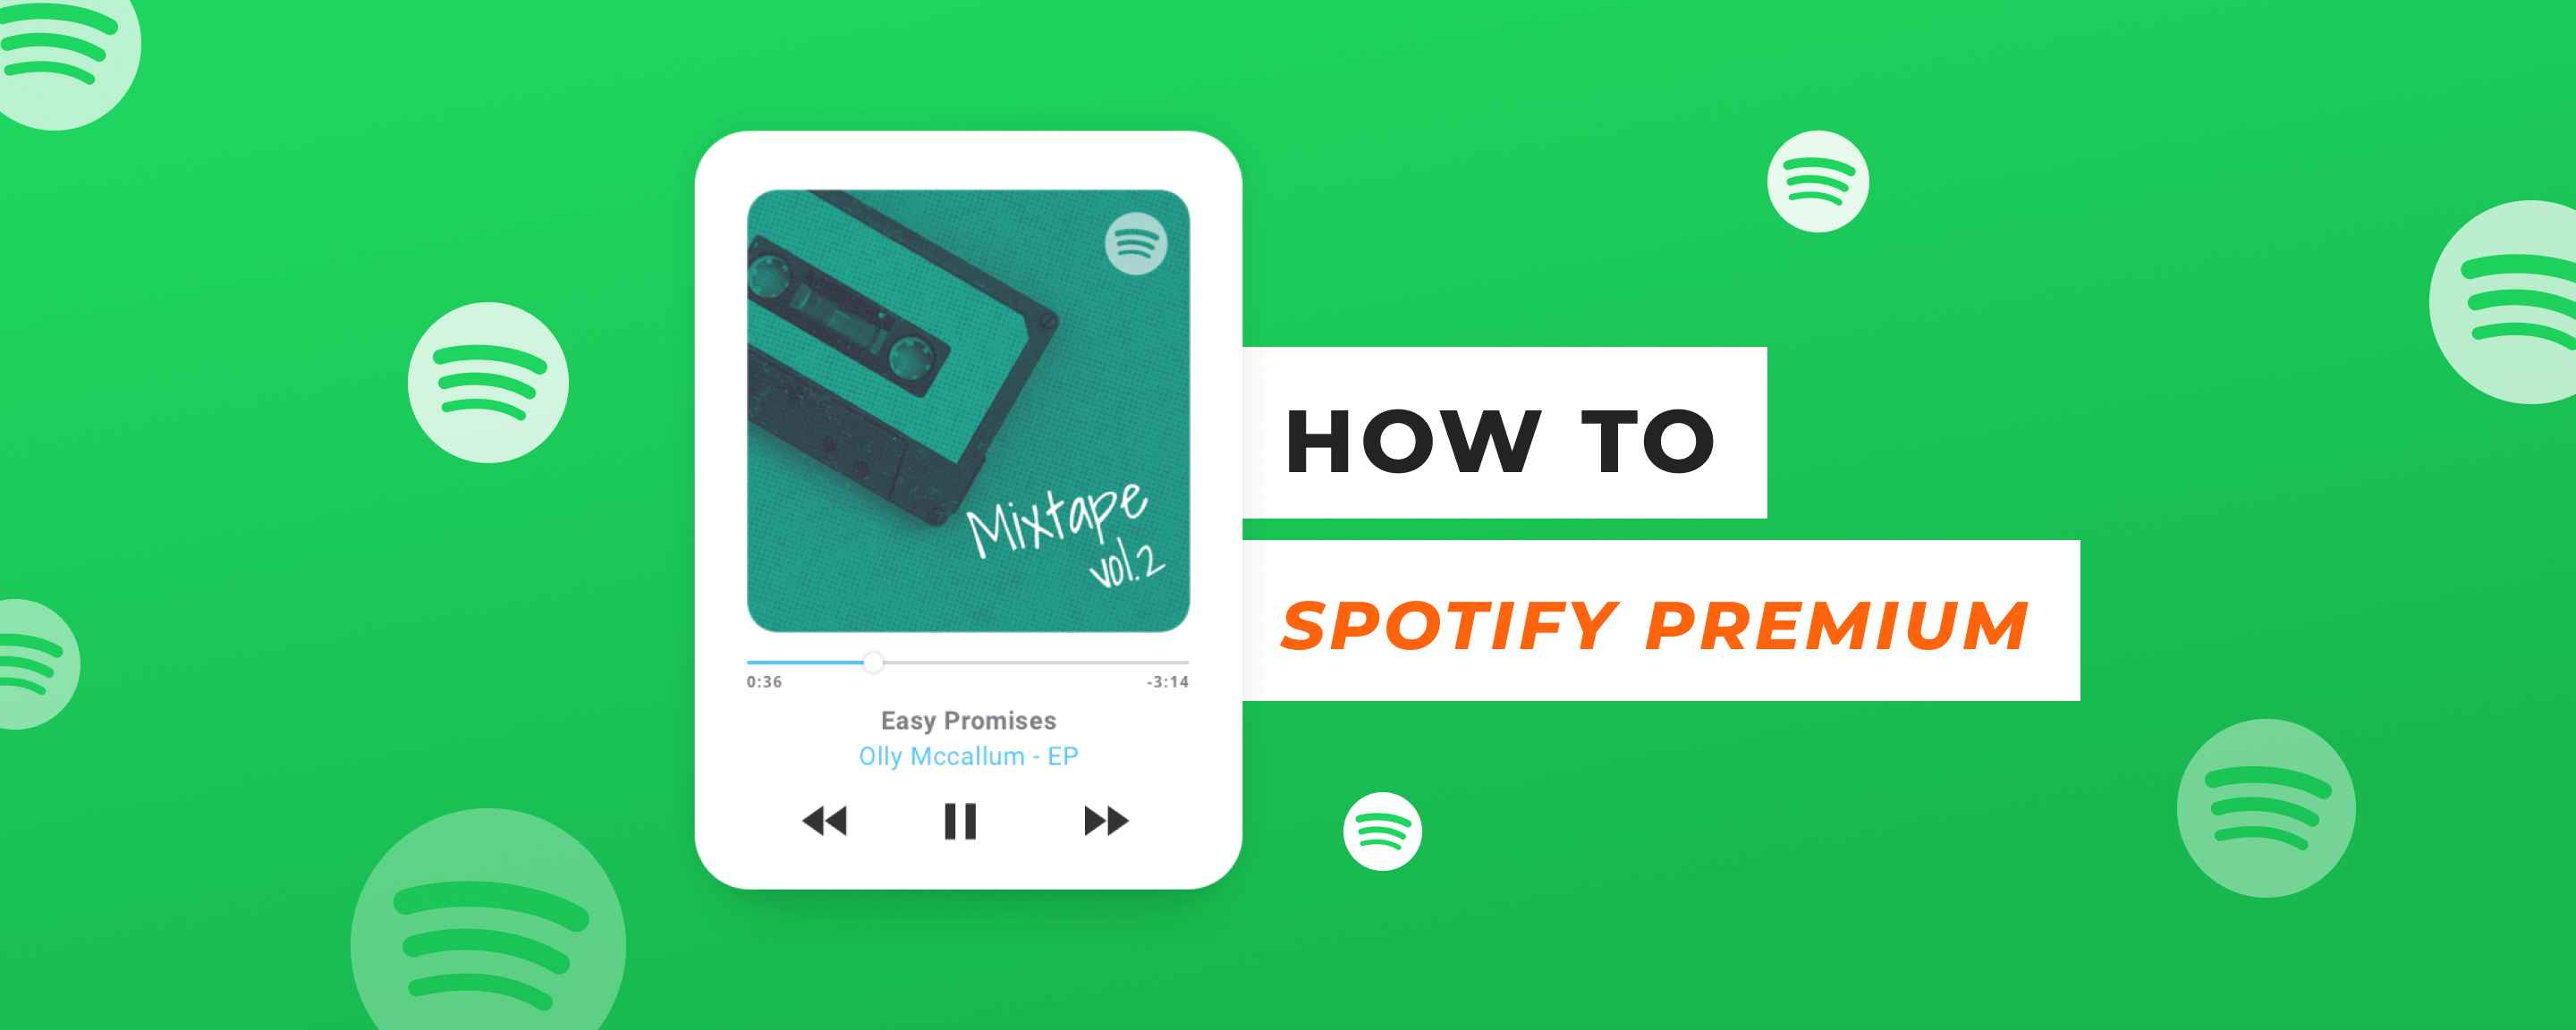 Can you share your free spotify account sign up